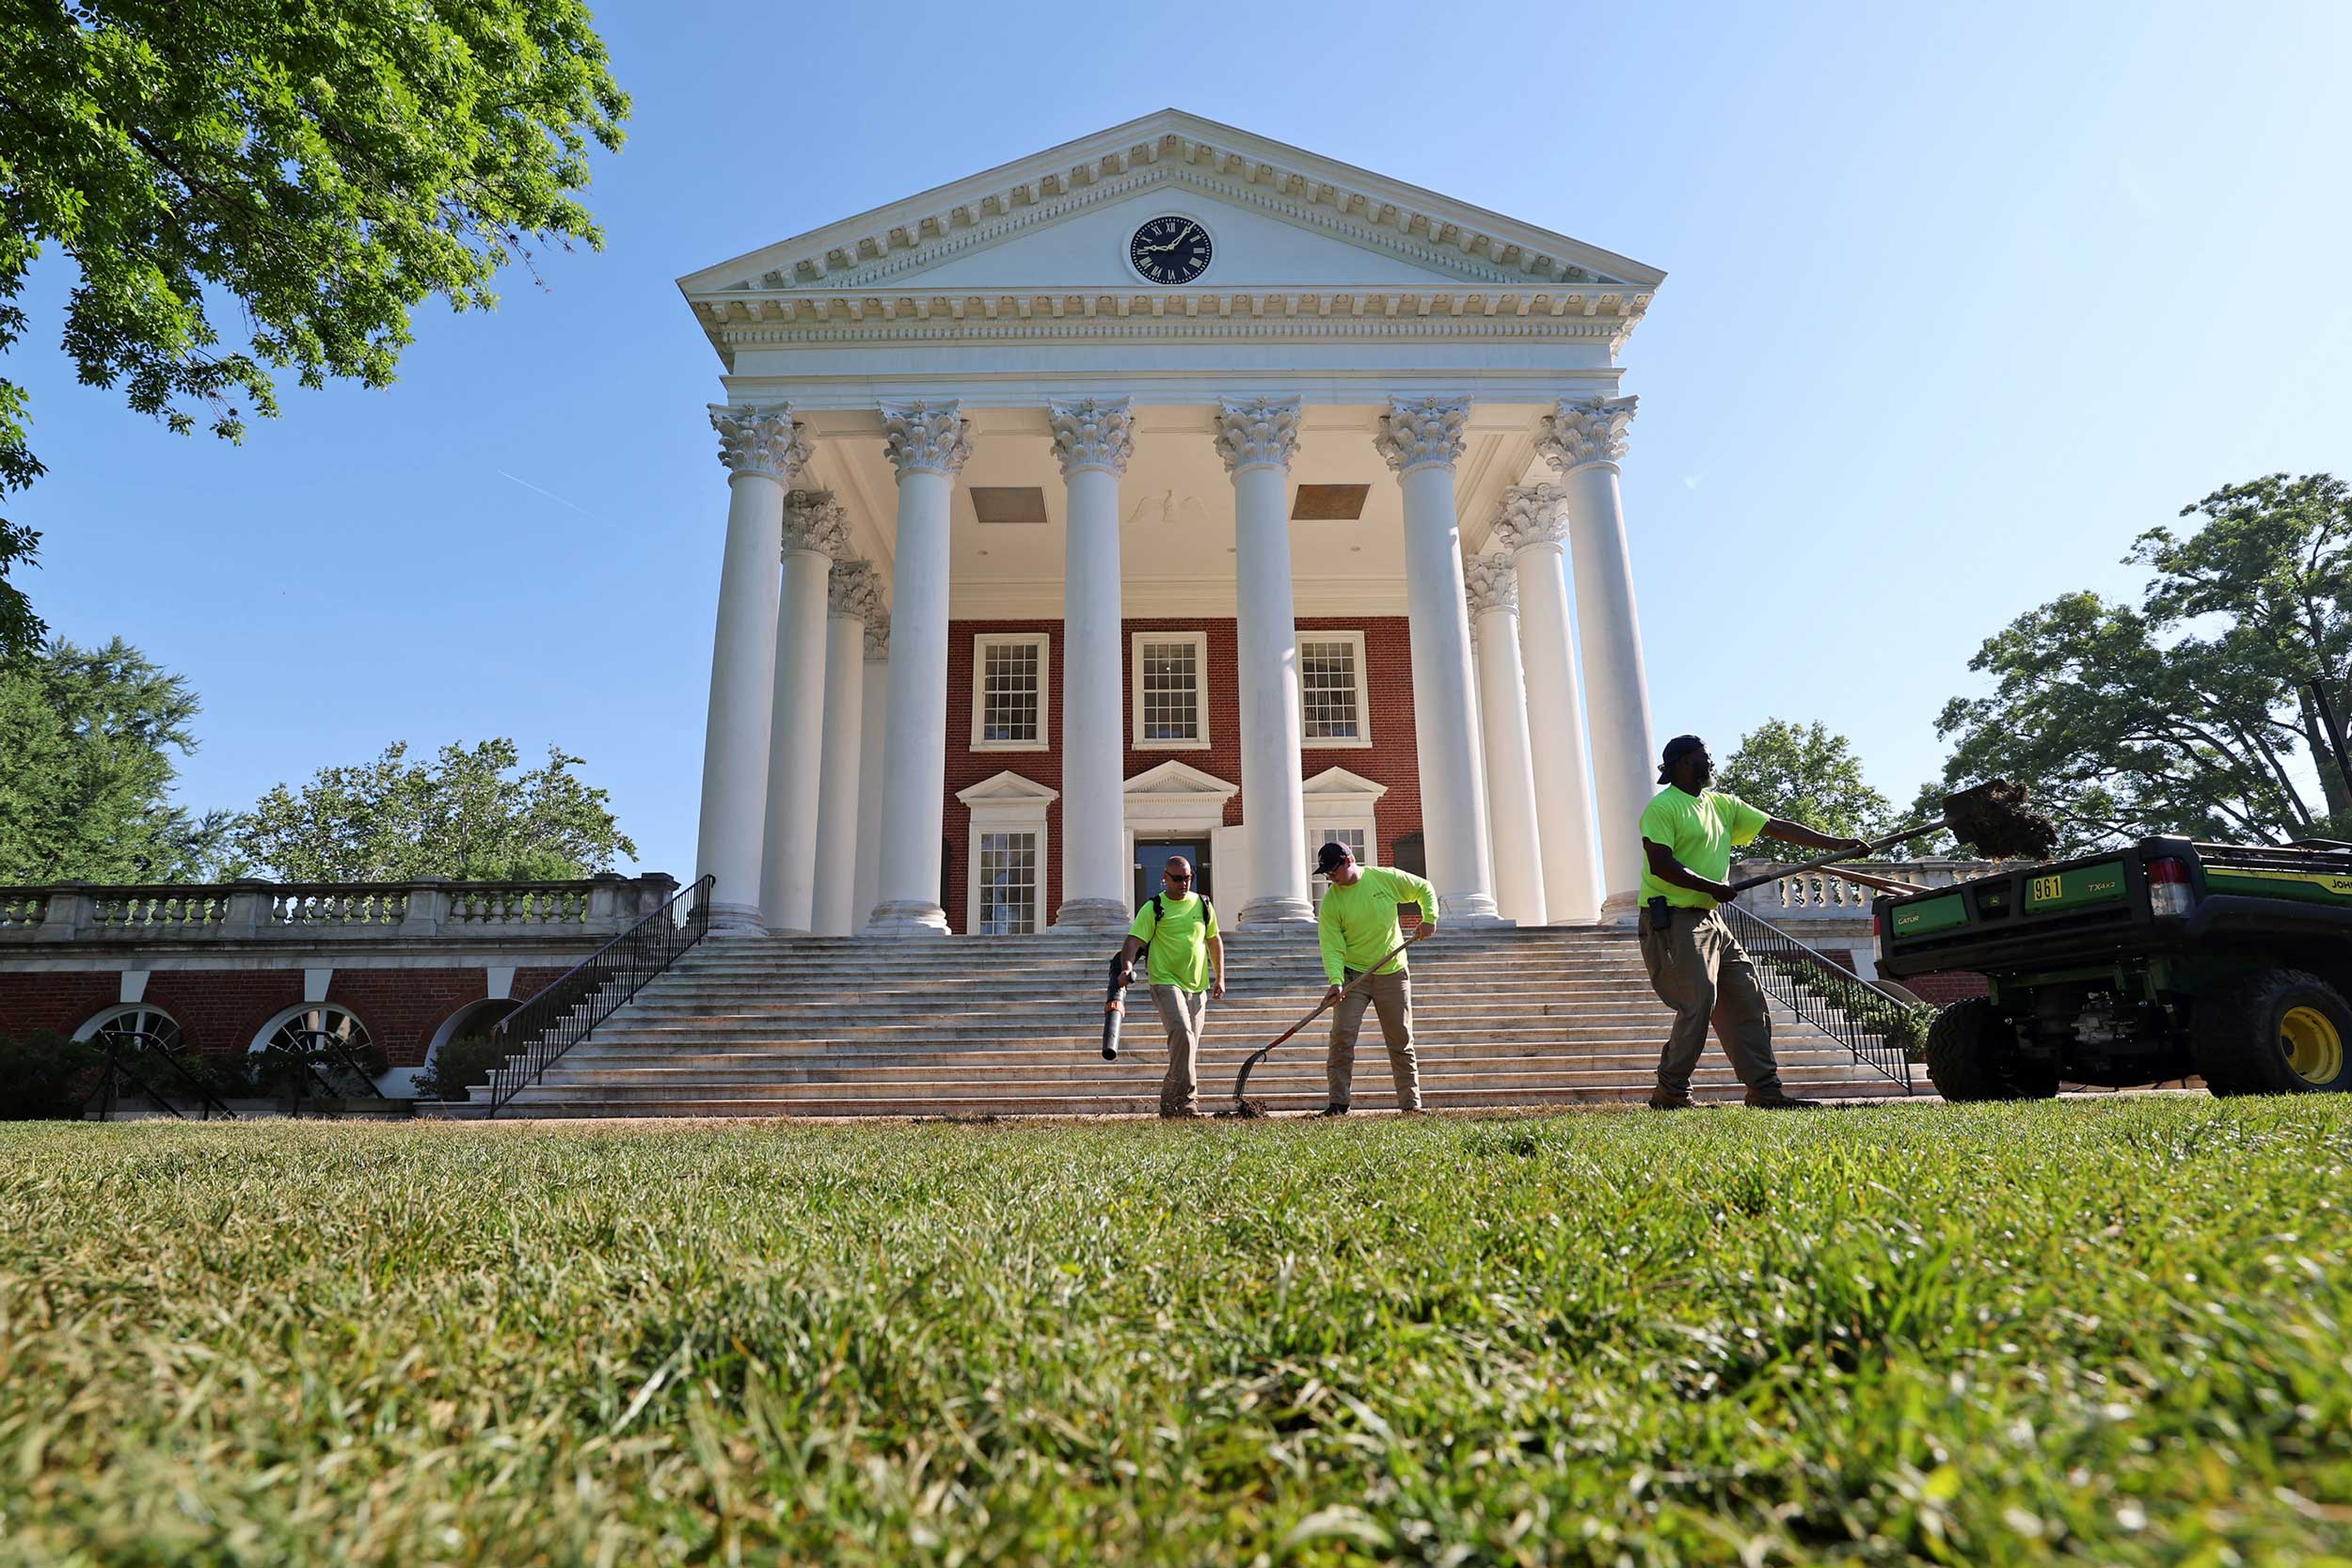 Three landscapers work in front of the Rotunda to repair the Lawn